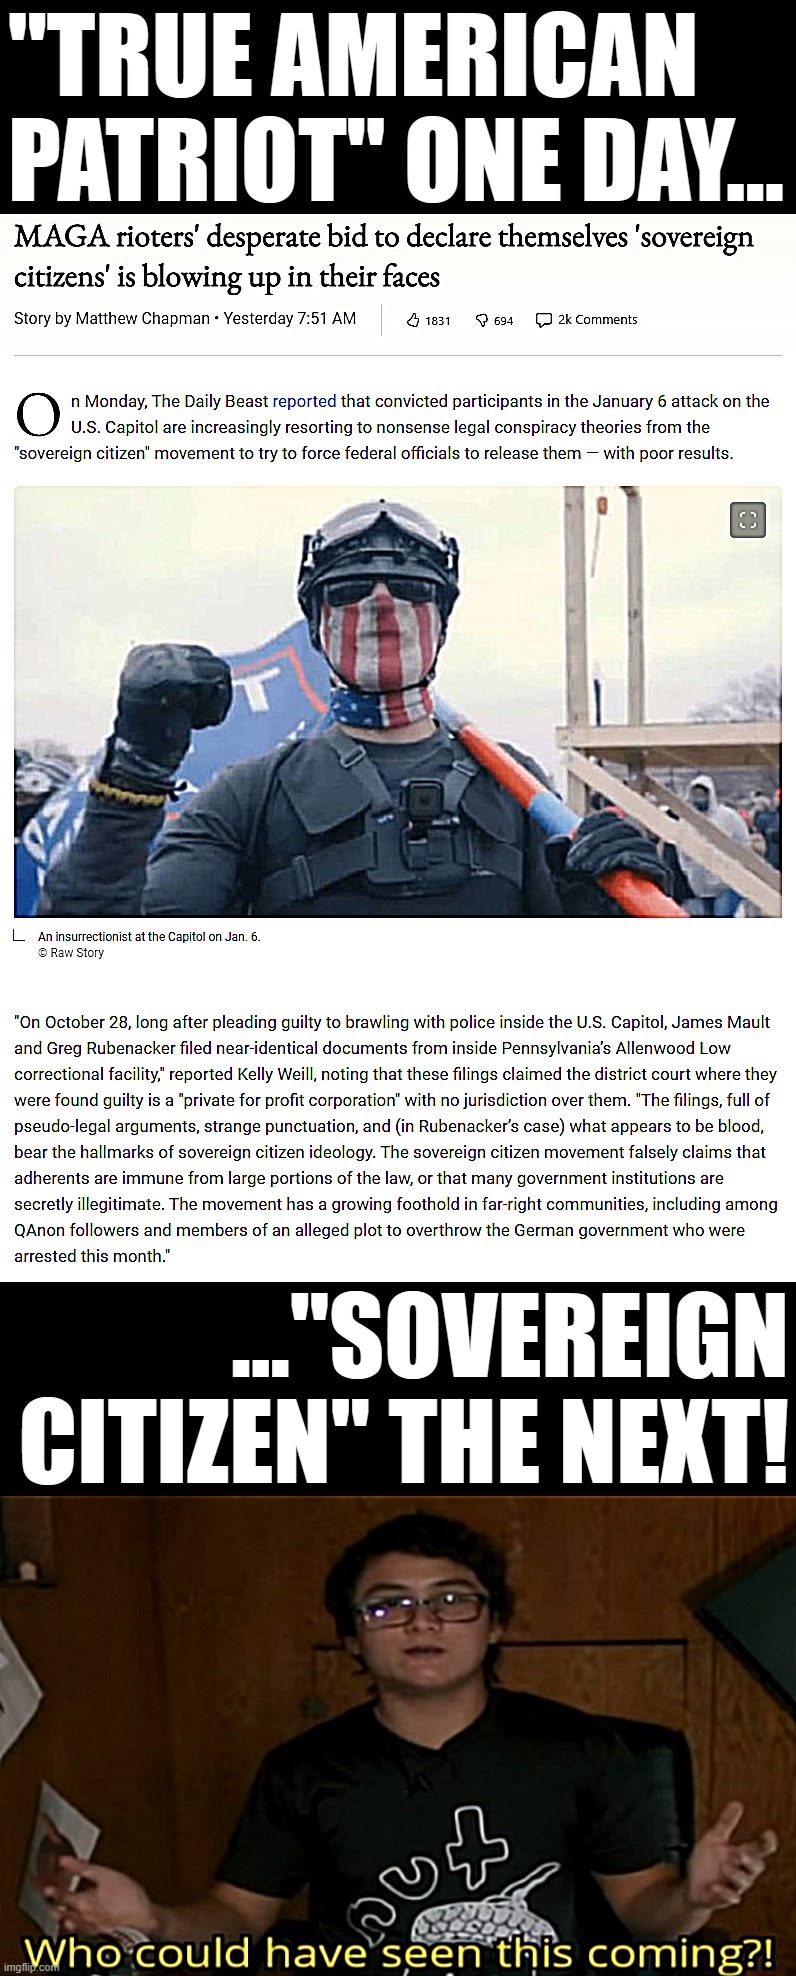 Disclaiming any association with the United States in a doomed bid to evade the consequences of their actions? That's so weird | "TRUE AMERICAN PATRIOT" ONE DAY... ..."SOVEREIGN CITIZEN" THE NEXT! | image tagged in jan 6 maga rioters claim sovereign citizenship,who could have seen this coming | made w/ Imgflip meme maker